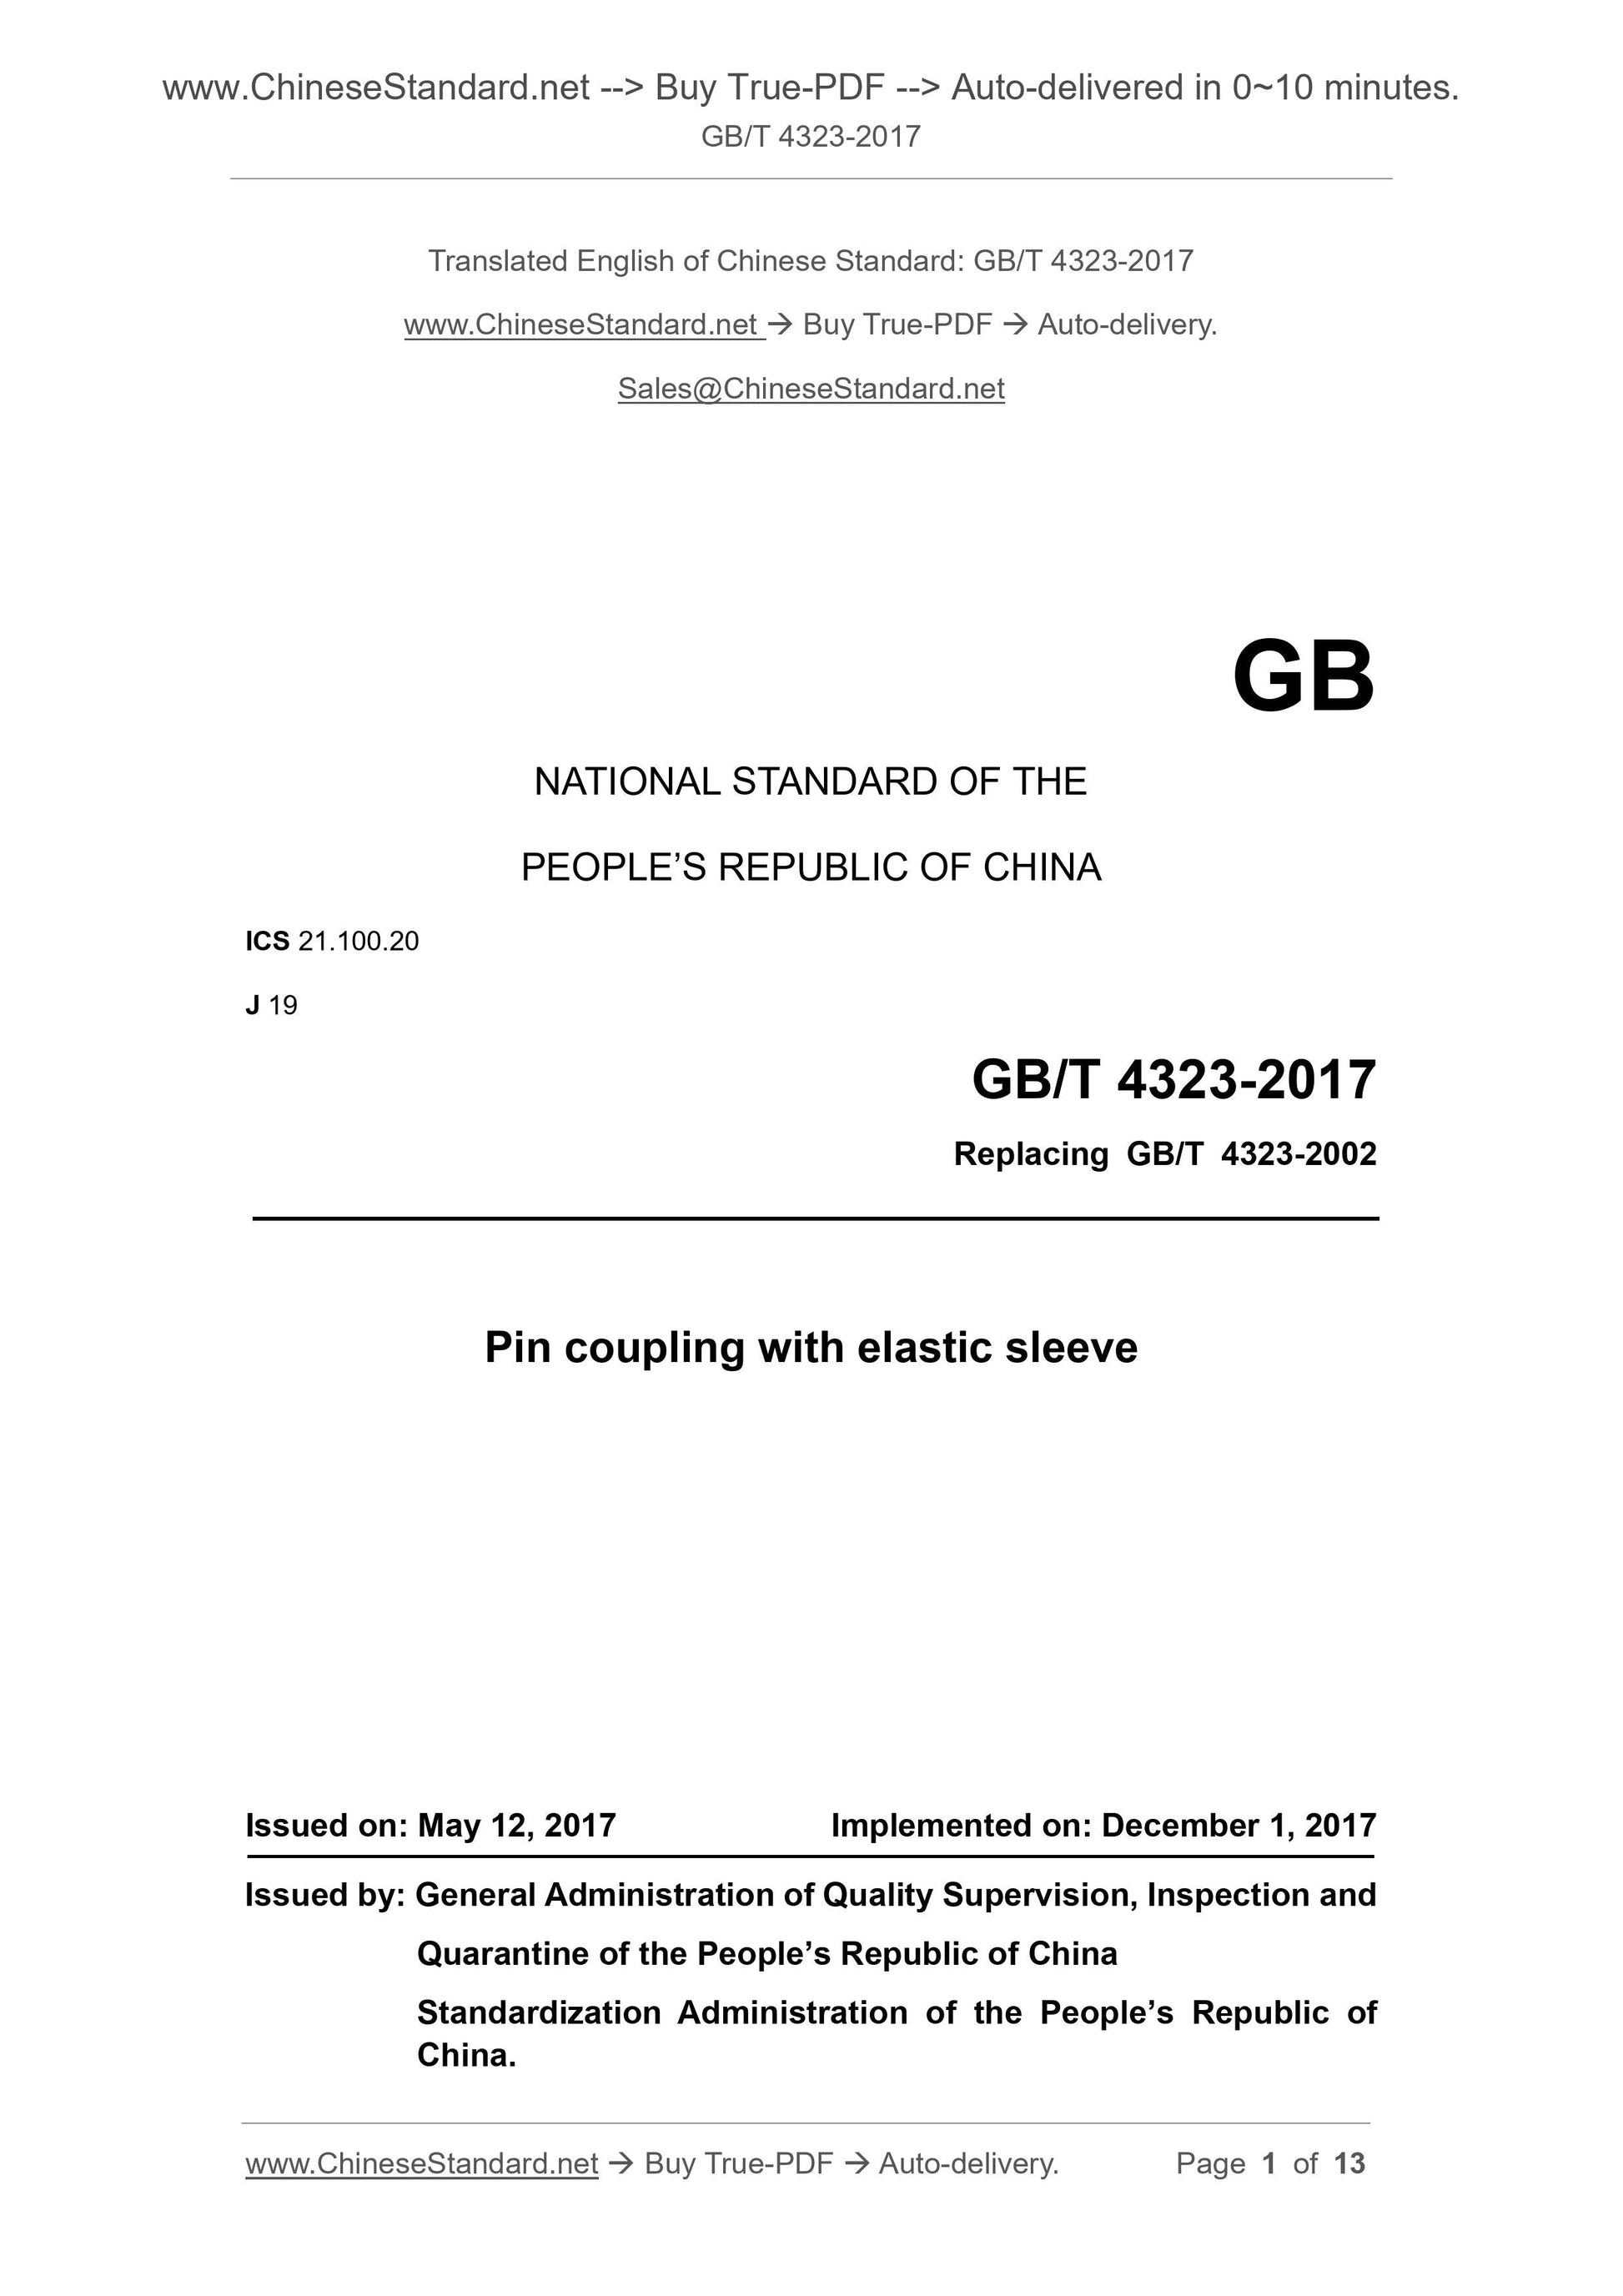 GB/T 4323-2017 Page 1